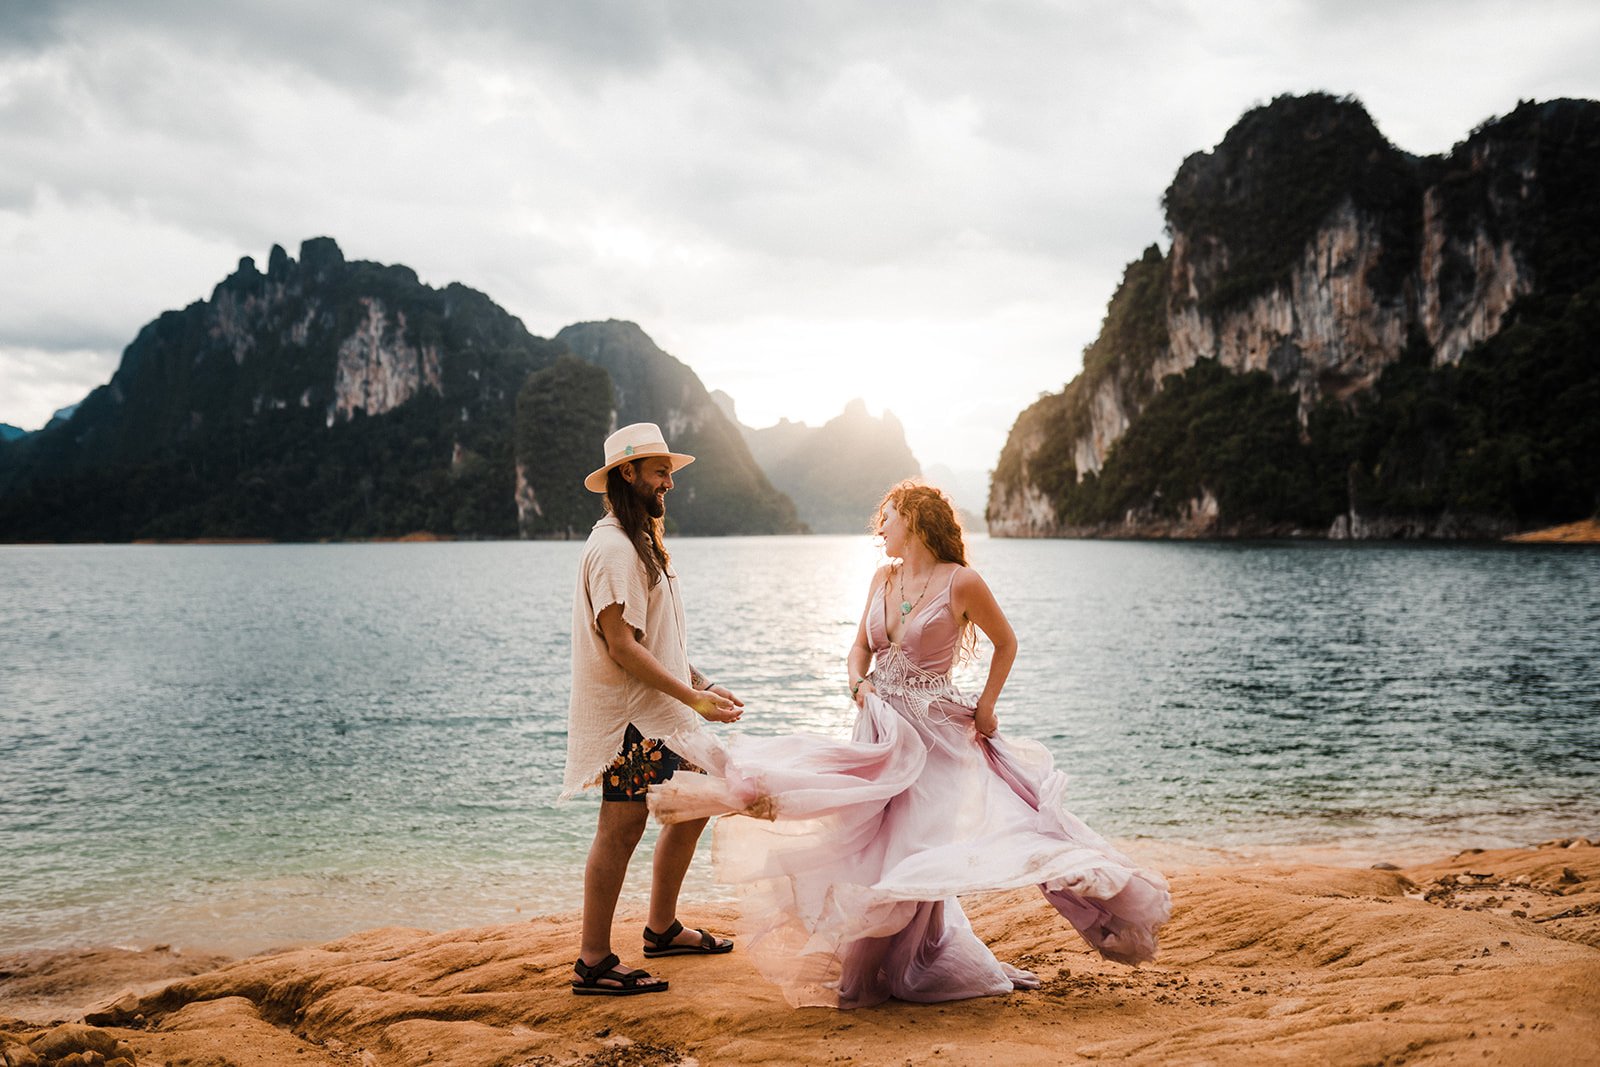  Custom wedding dress. Bride Meg’s elopement in Thailand. Photo by  The Foxes Photography.   